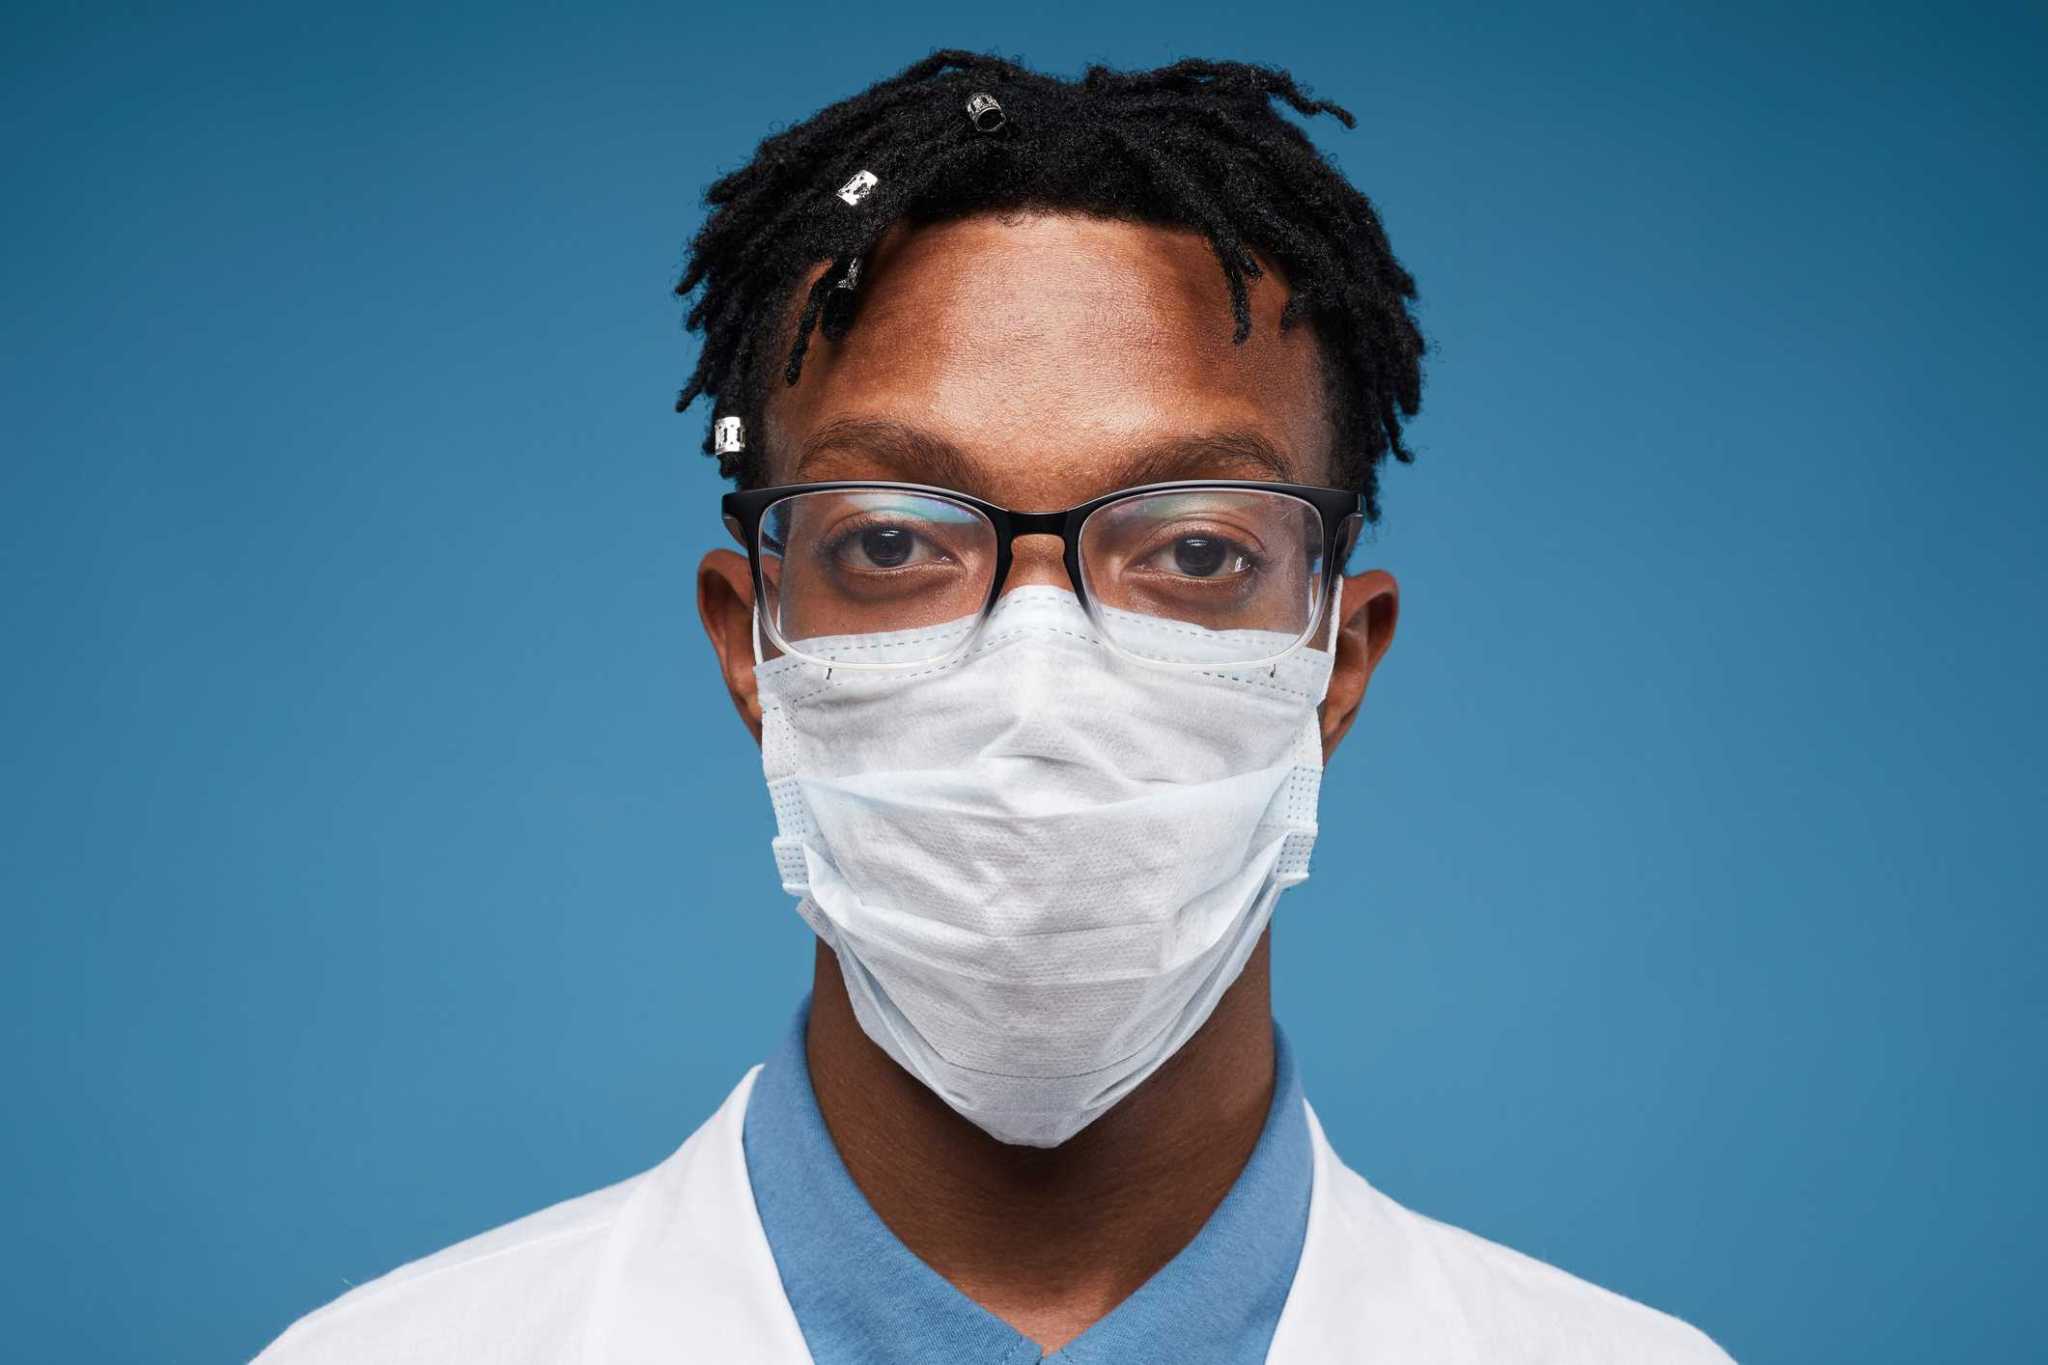 Why DIY surgical masks are a bad idea during the coronavirus outbreak